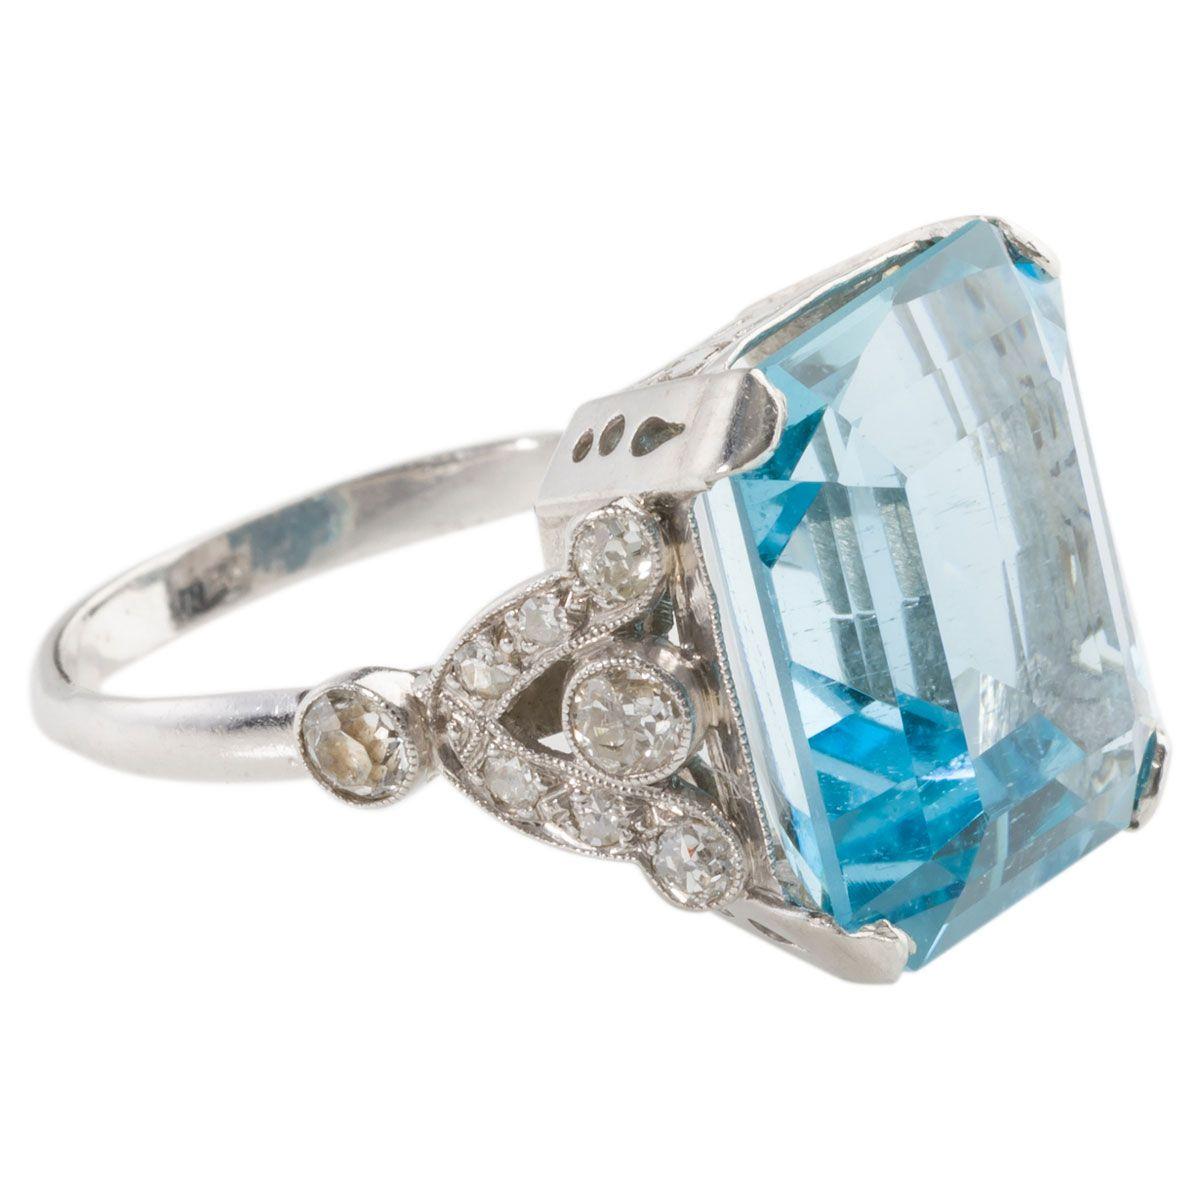 Straight from the Art Deco period we bring you this stunning natural 10.60ct Emerald cut Aquamarine dress ring. It's timeless, elegant and oh so popular. These rings have grown in popularity since Prince Harry gifted his late Mother, Princess